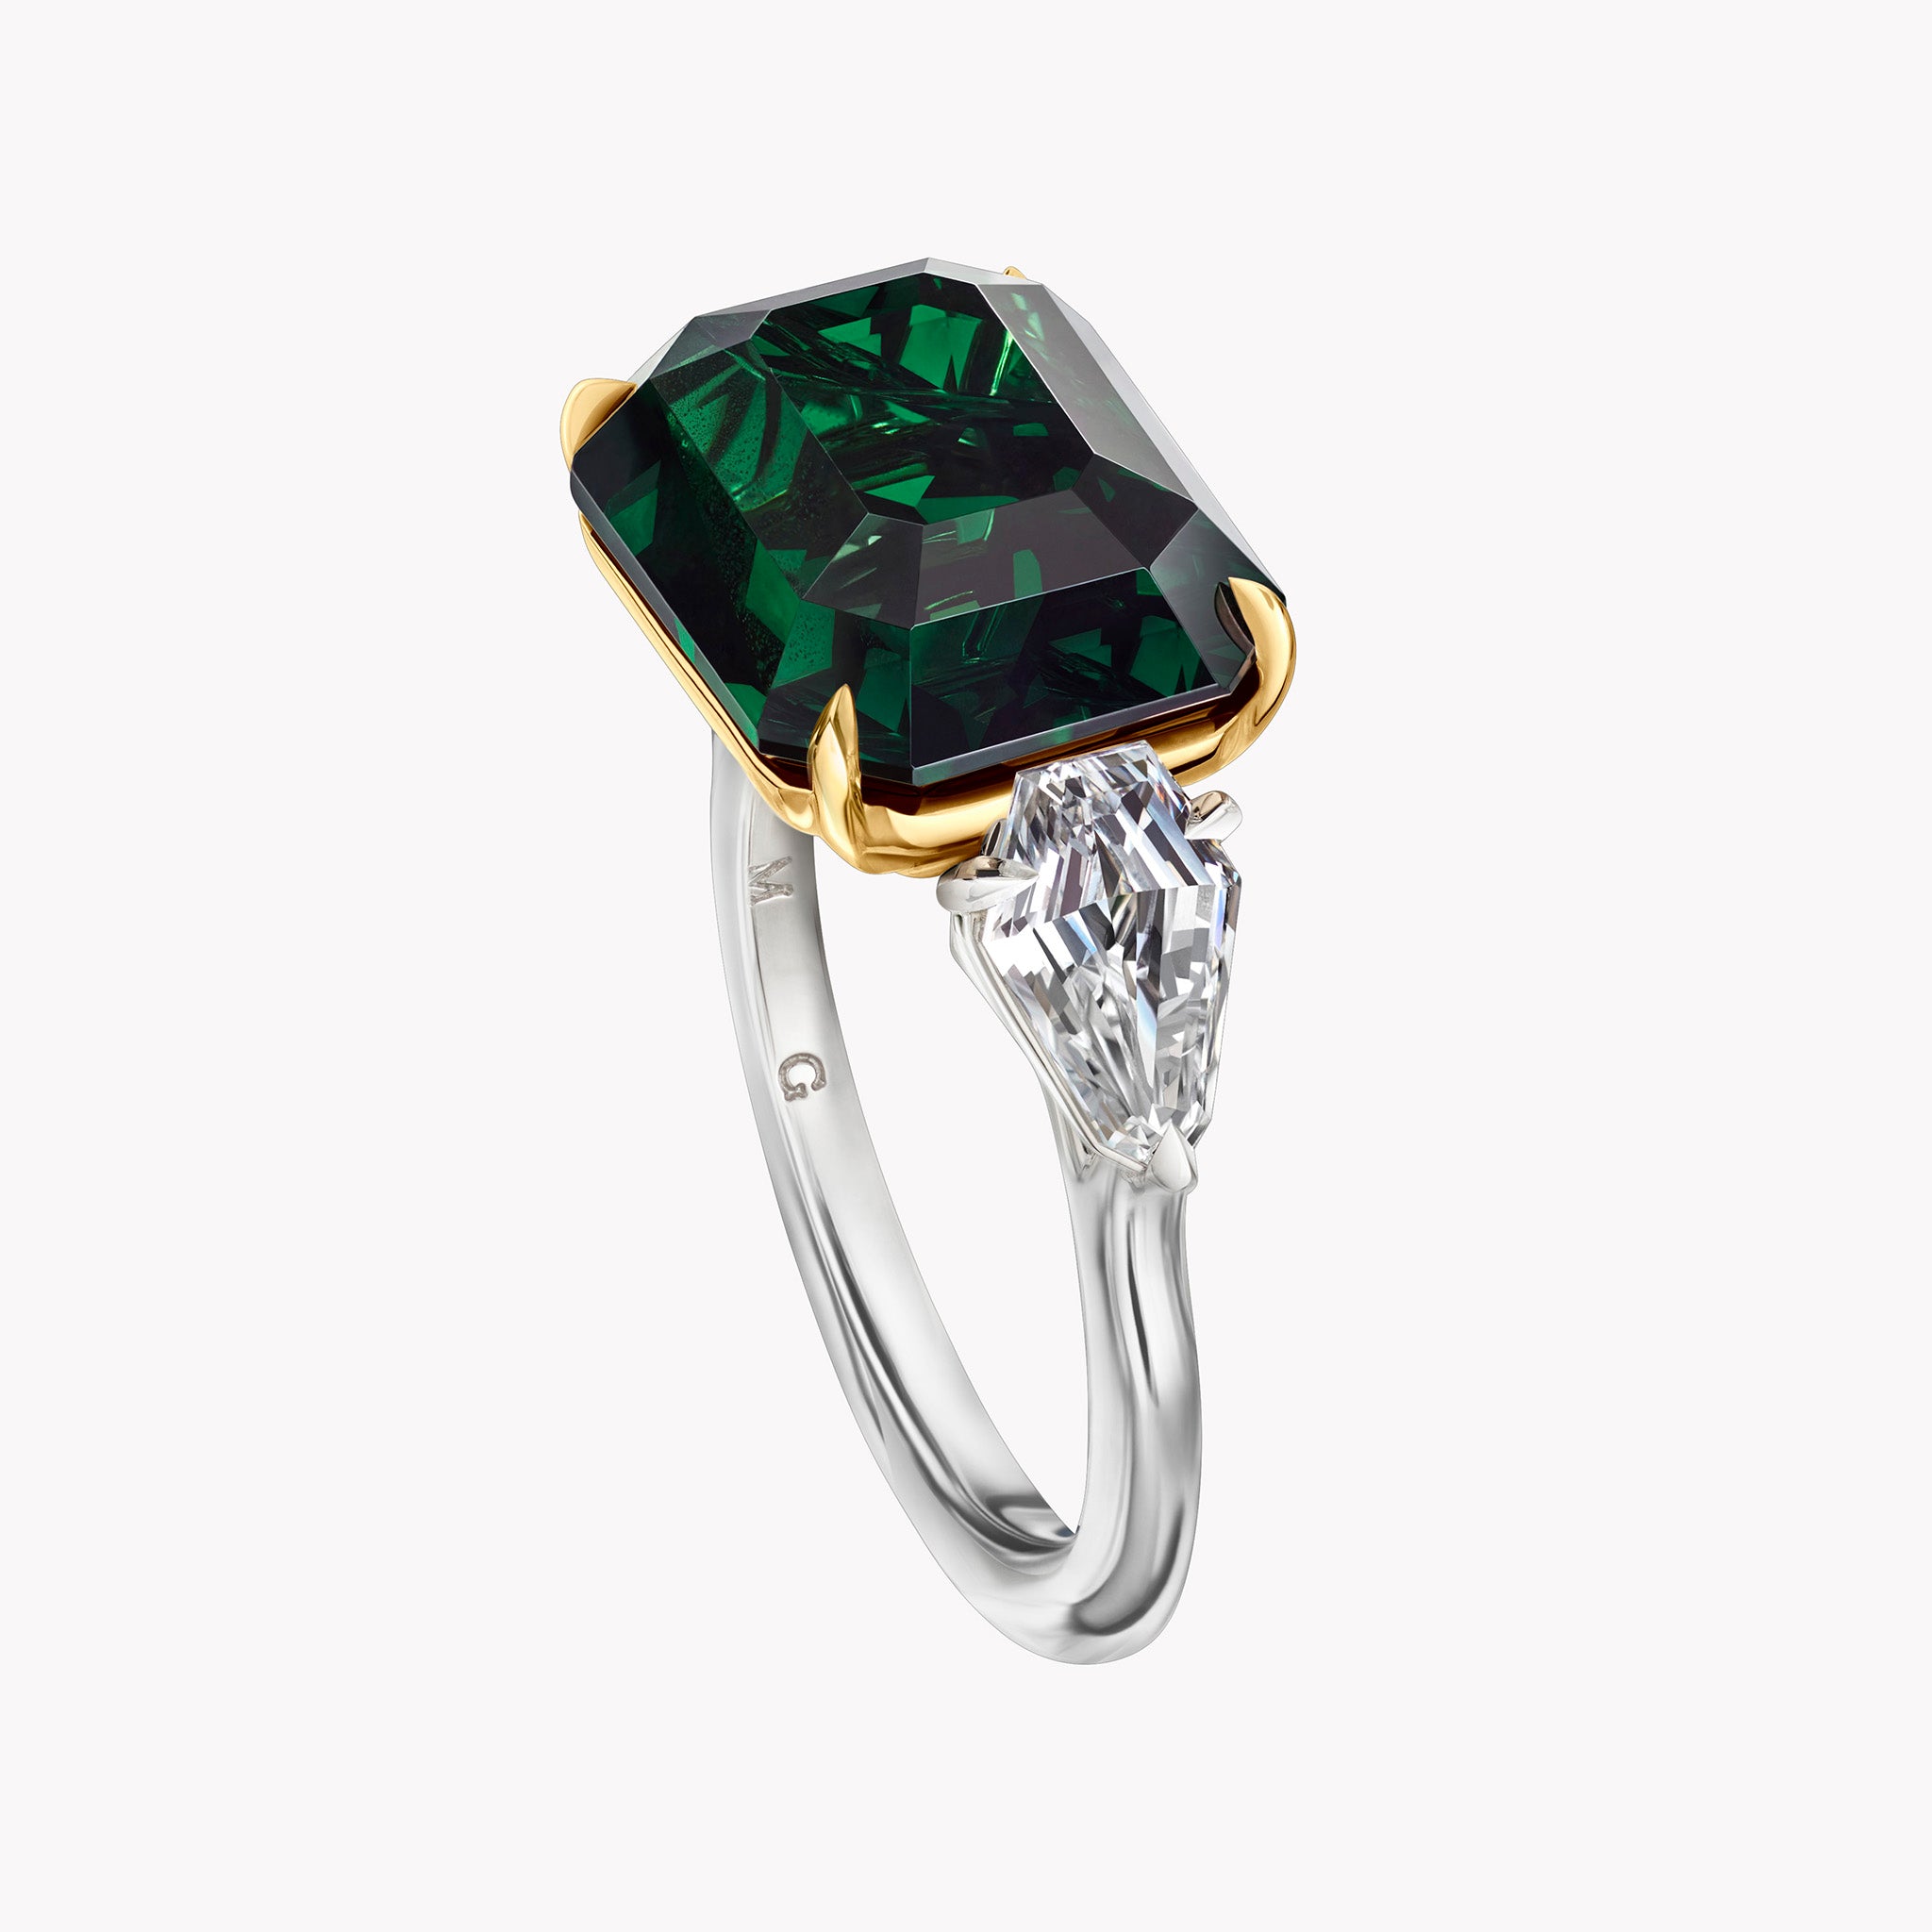 The Aster Green Sapphire Ring